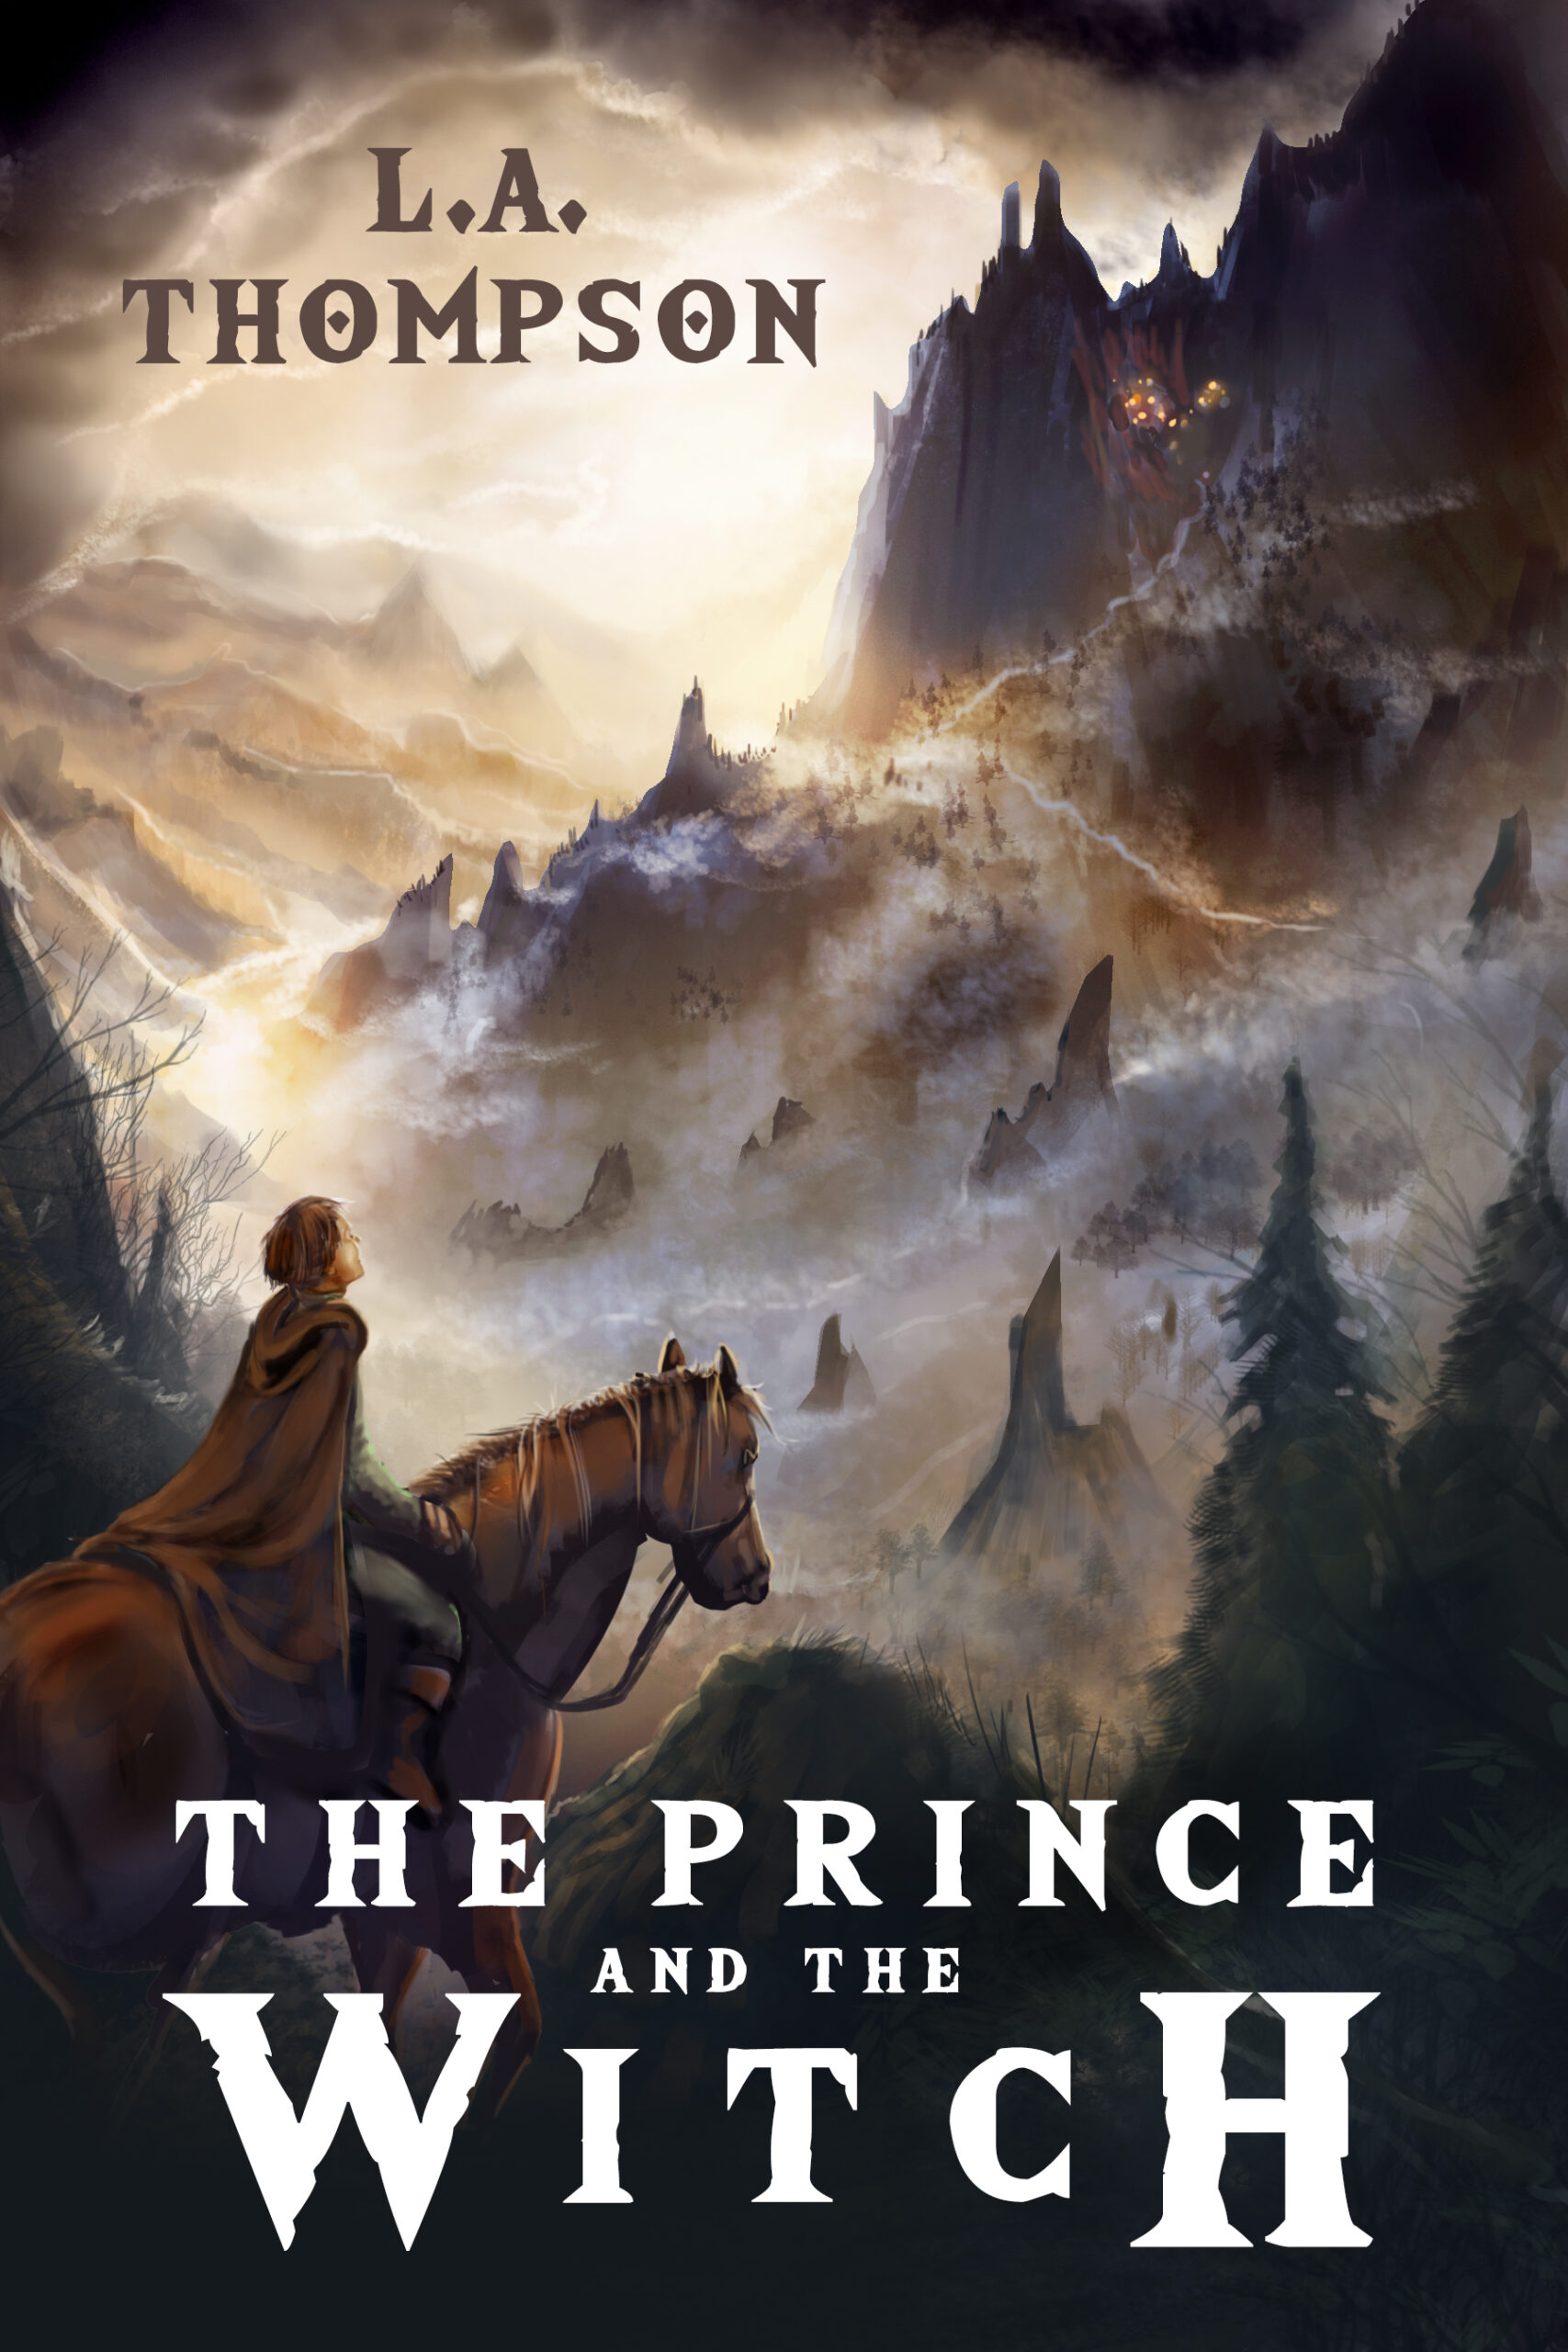 Misty mountains fantasy book cover, The Prince and the Witch. Art by The Noble Artist